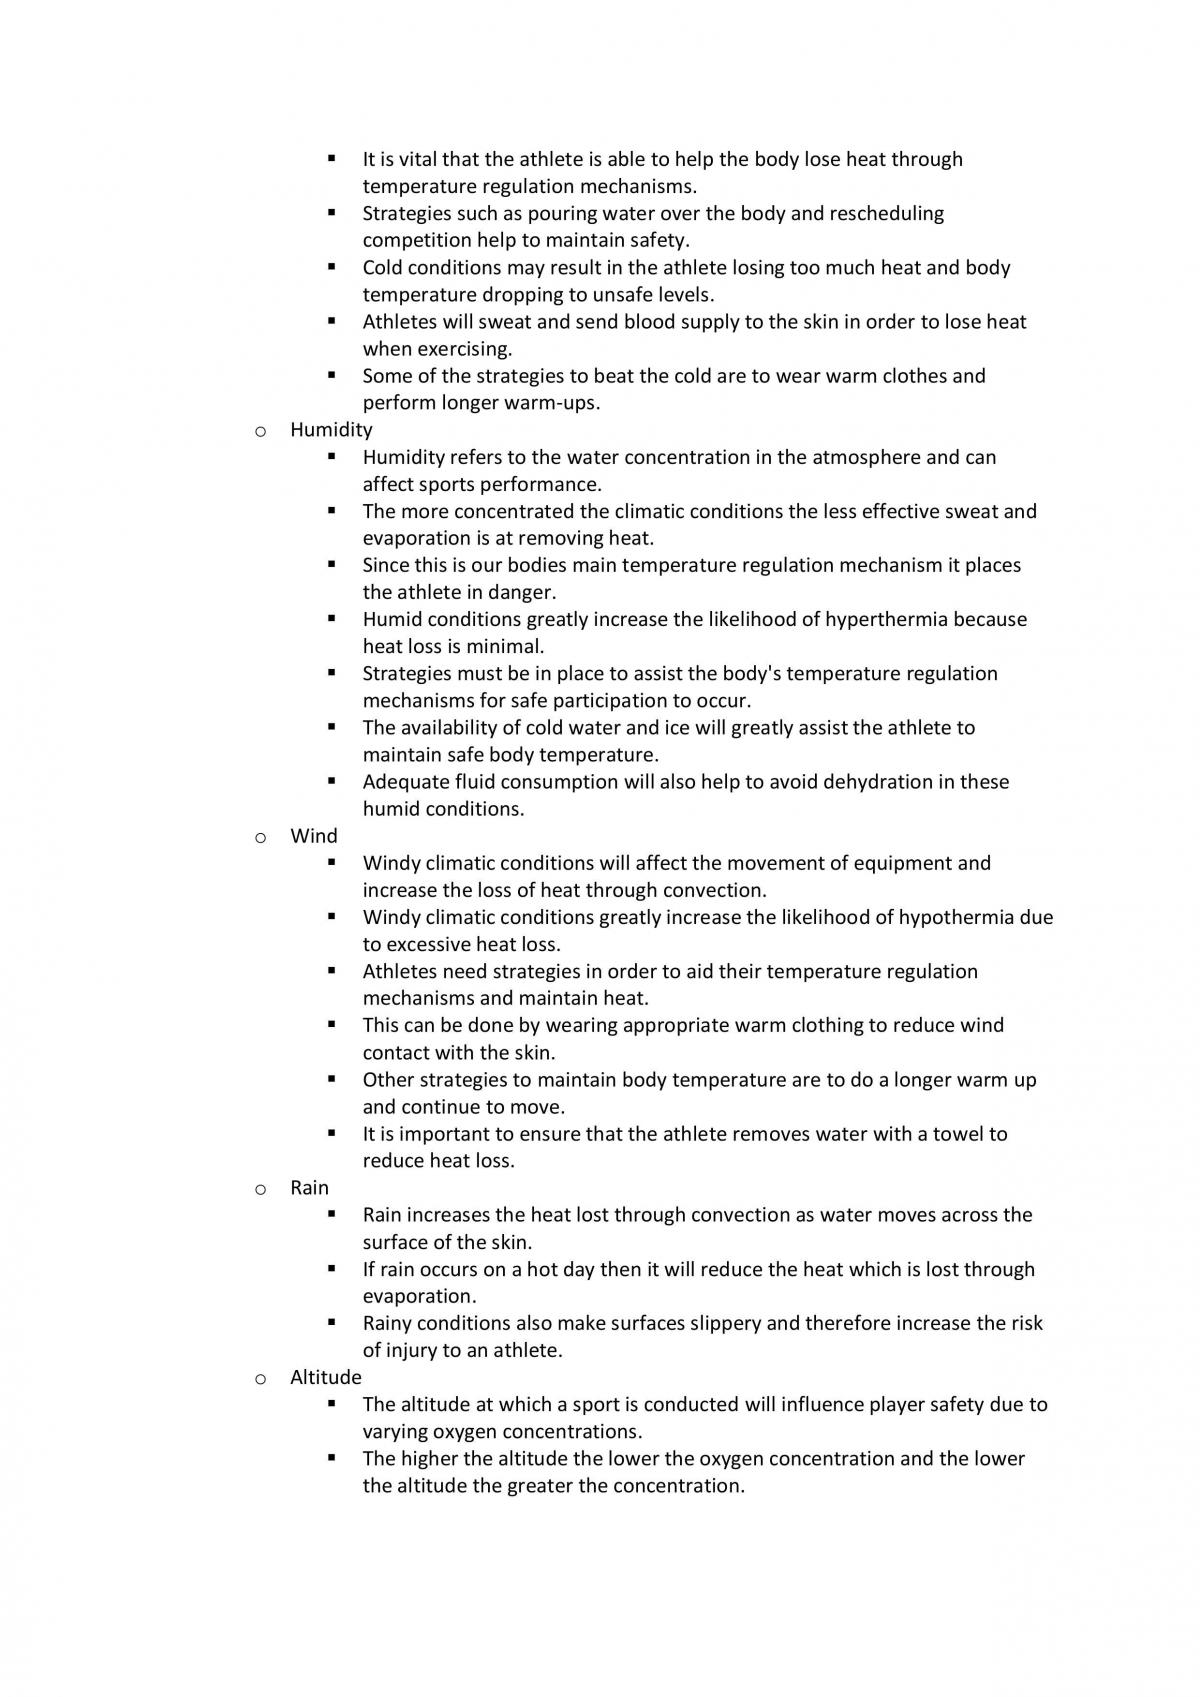 PDHPE Complete Notes | Personal Development, Health and Physical ...